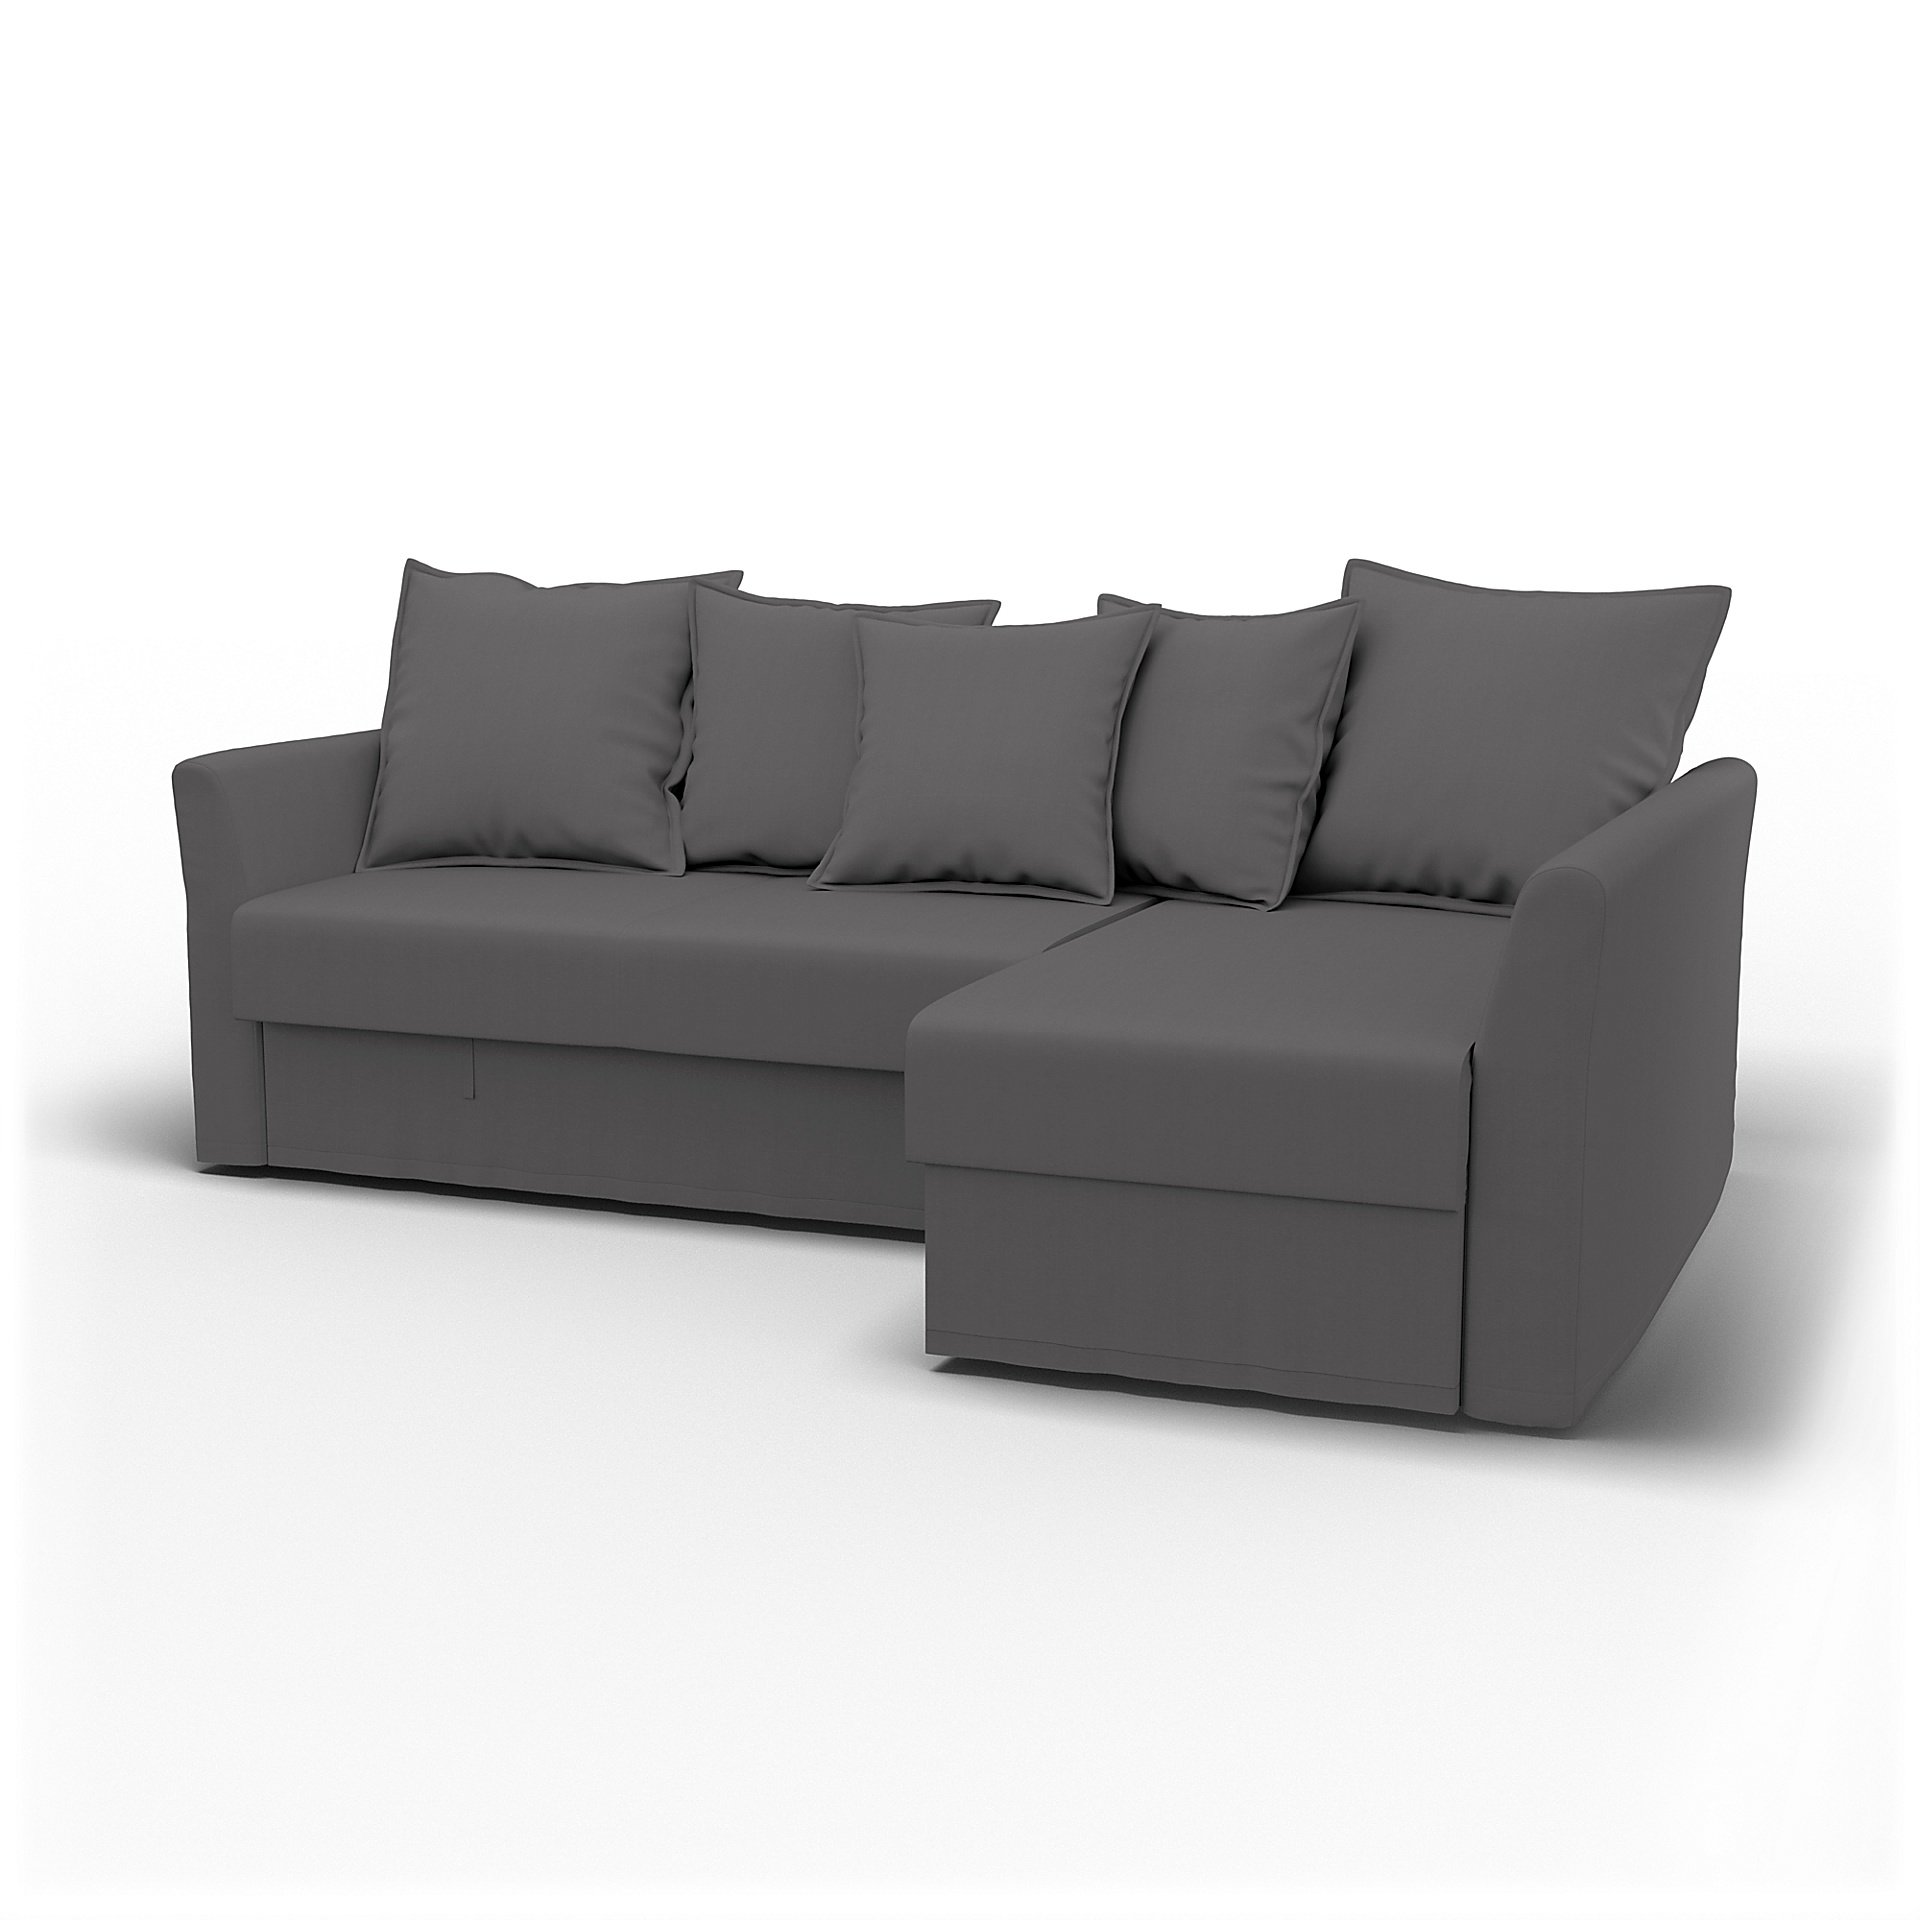 IKEA - Holmsund Sofabed with Chaiselongue, Smoked Pearl, Cotton - Bemz